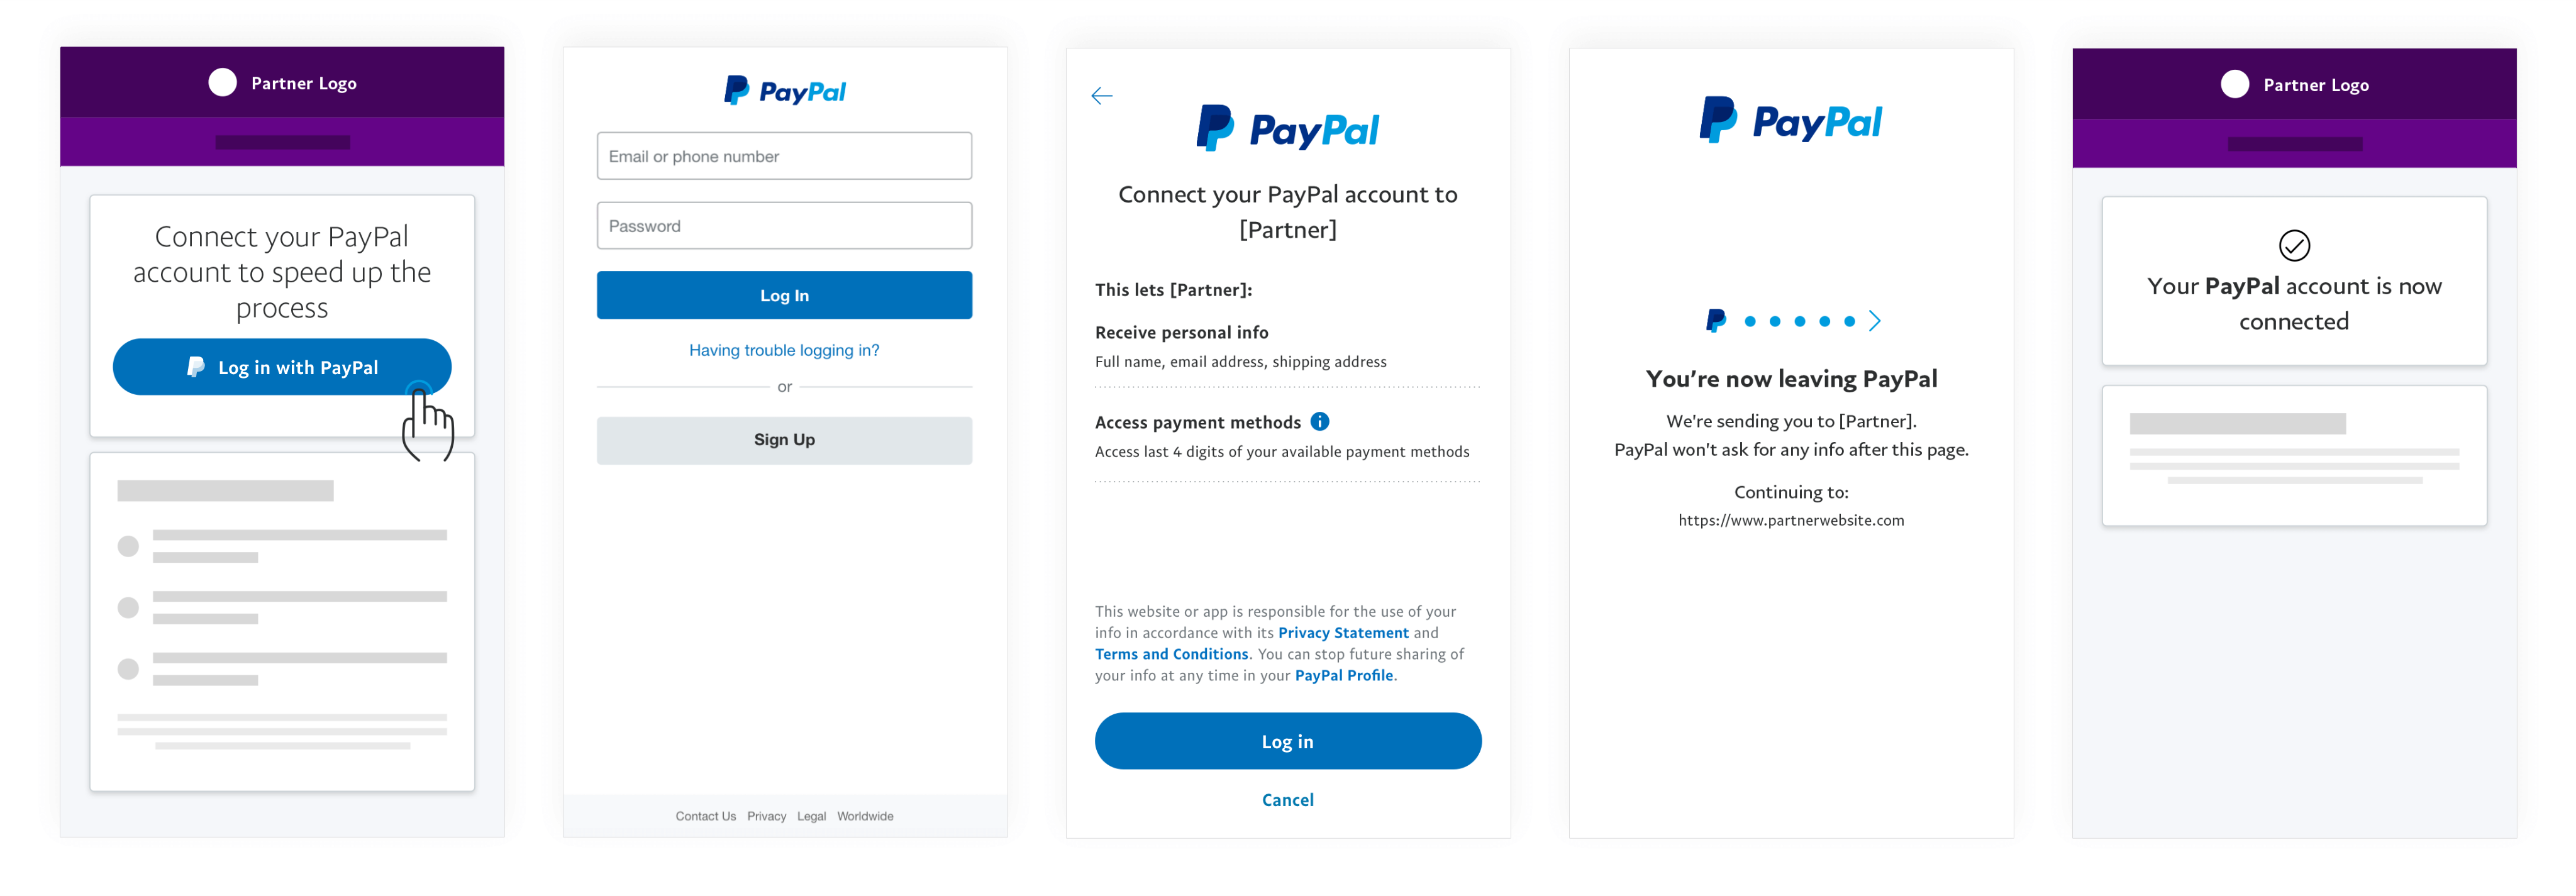 How can I integrate with PayPal?